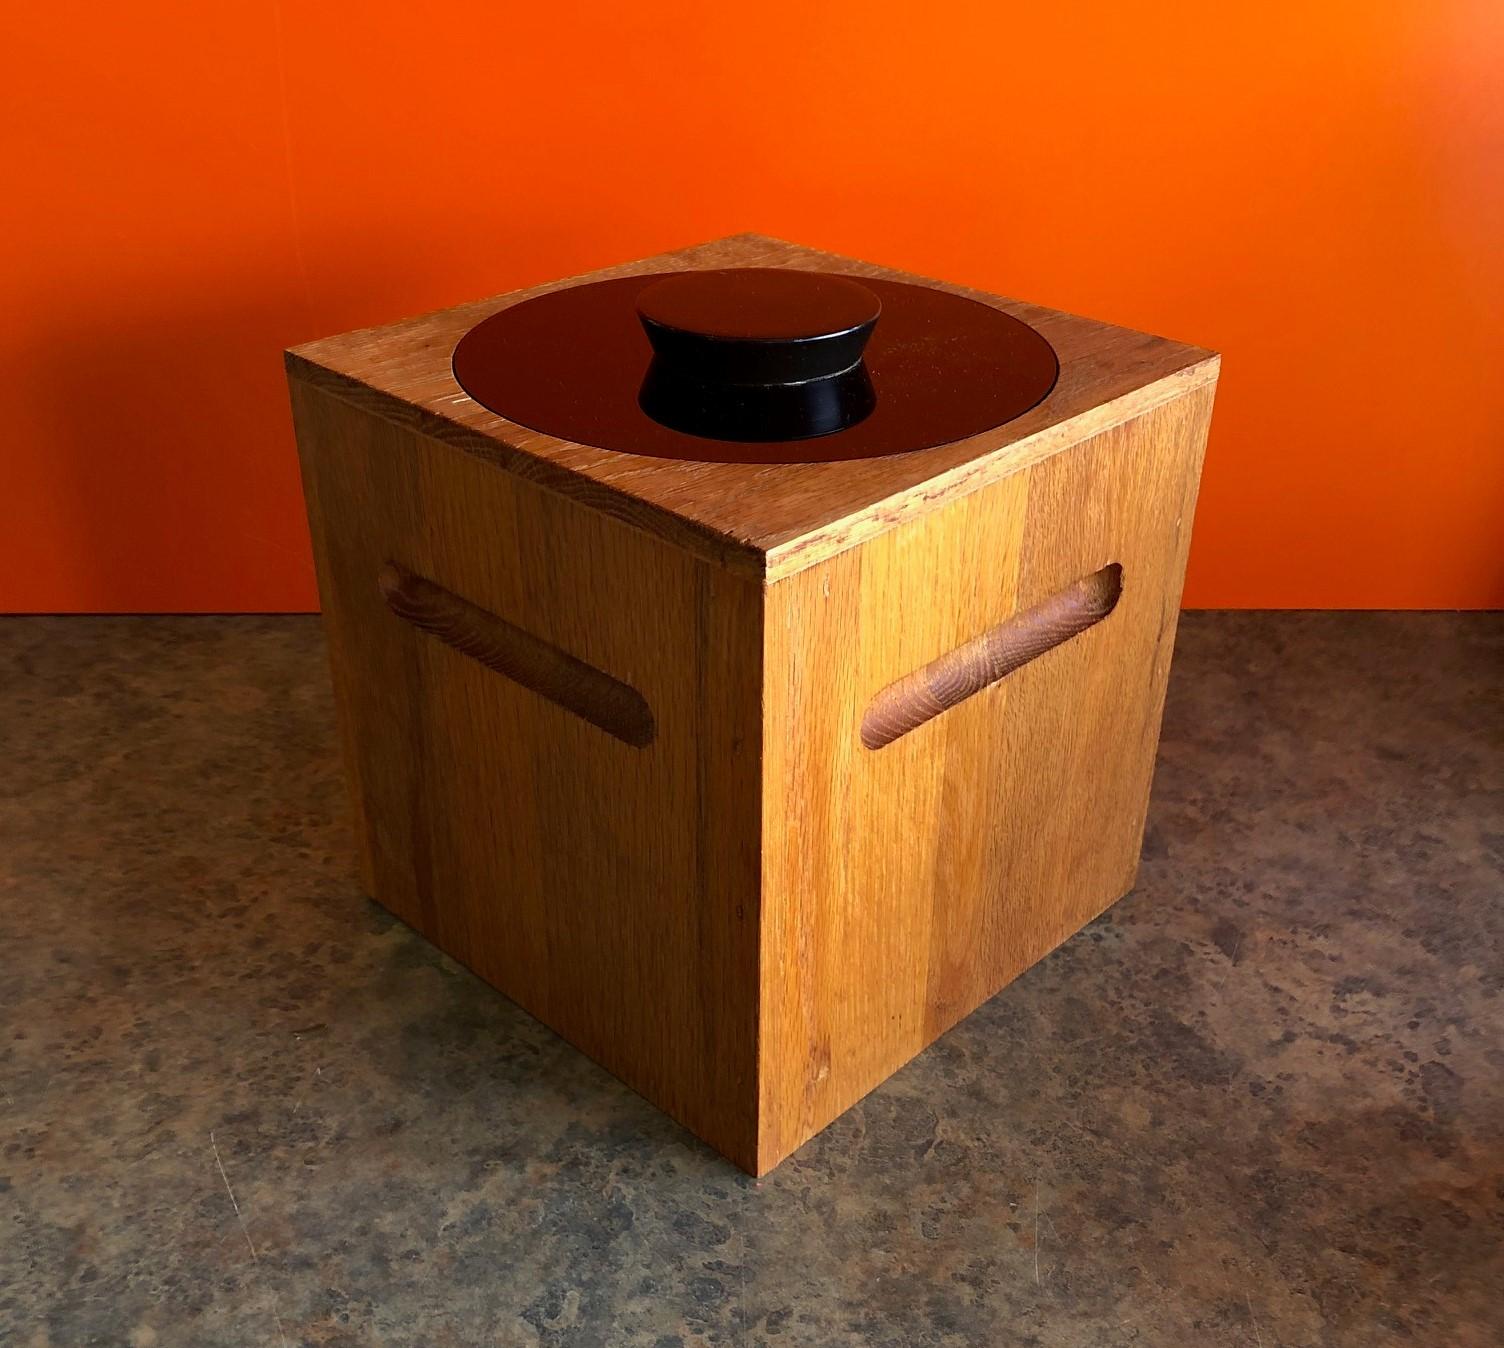 A very nice midcentury teak and plastic ice bucket by Morgan Designs, circa 1970s. The piece is very solid and sturdy and well made.